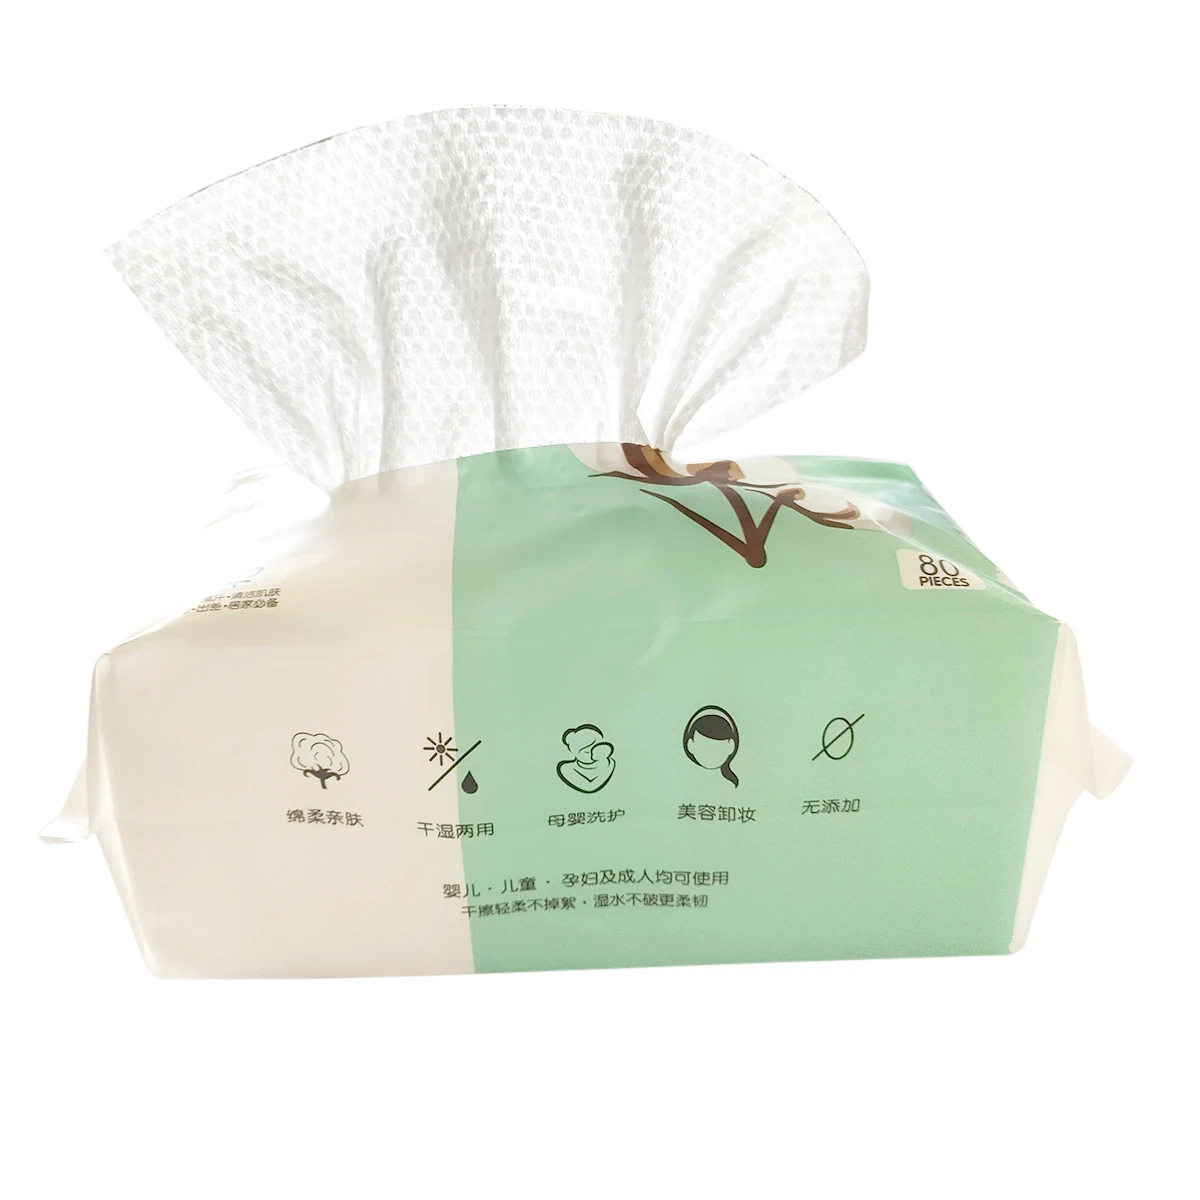 WET OR DRY Use daily cleansing facial towelettes, face Make up Remover Wipes Non Woven Cotton Towel facial clean Tissue